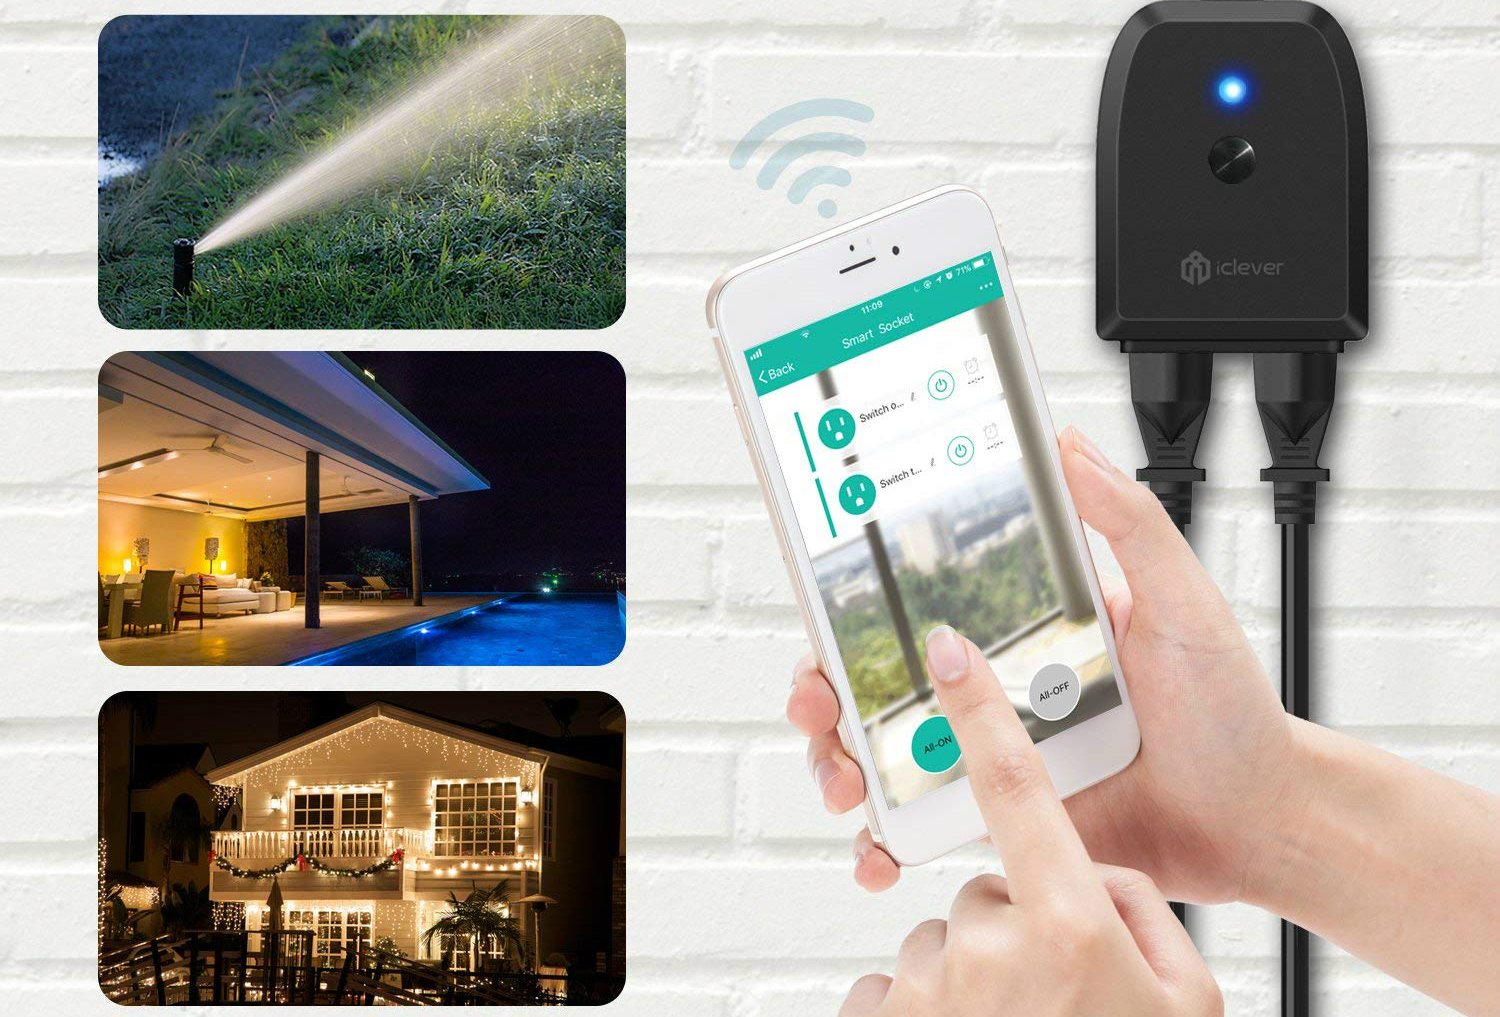 amazon echo and google home smart plug deals on iclever outdoor 1